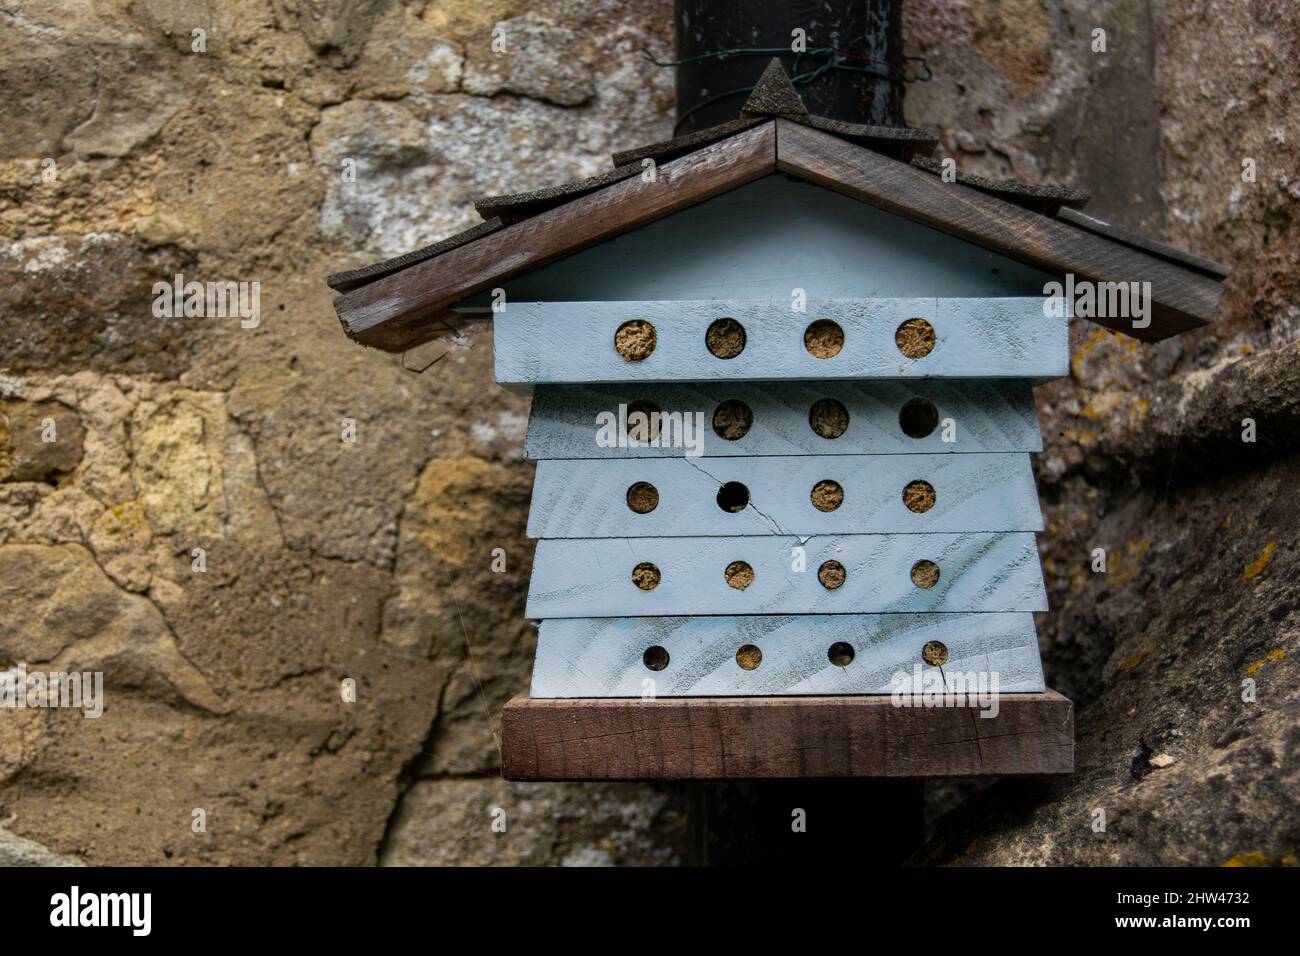 Small bug hotel known as a wildlife hotel or stack, house like construction made to help various insects to survive winter and free to leave in spring Stock Photo